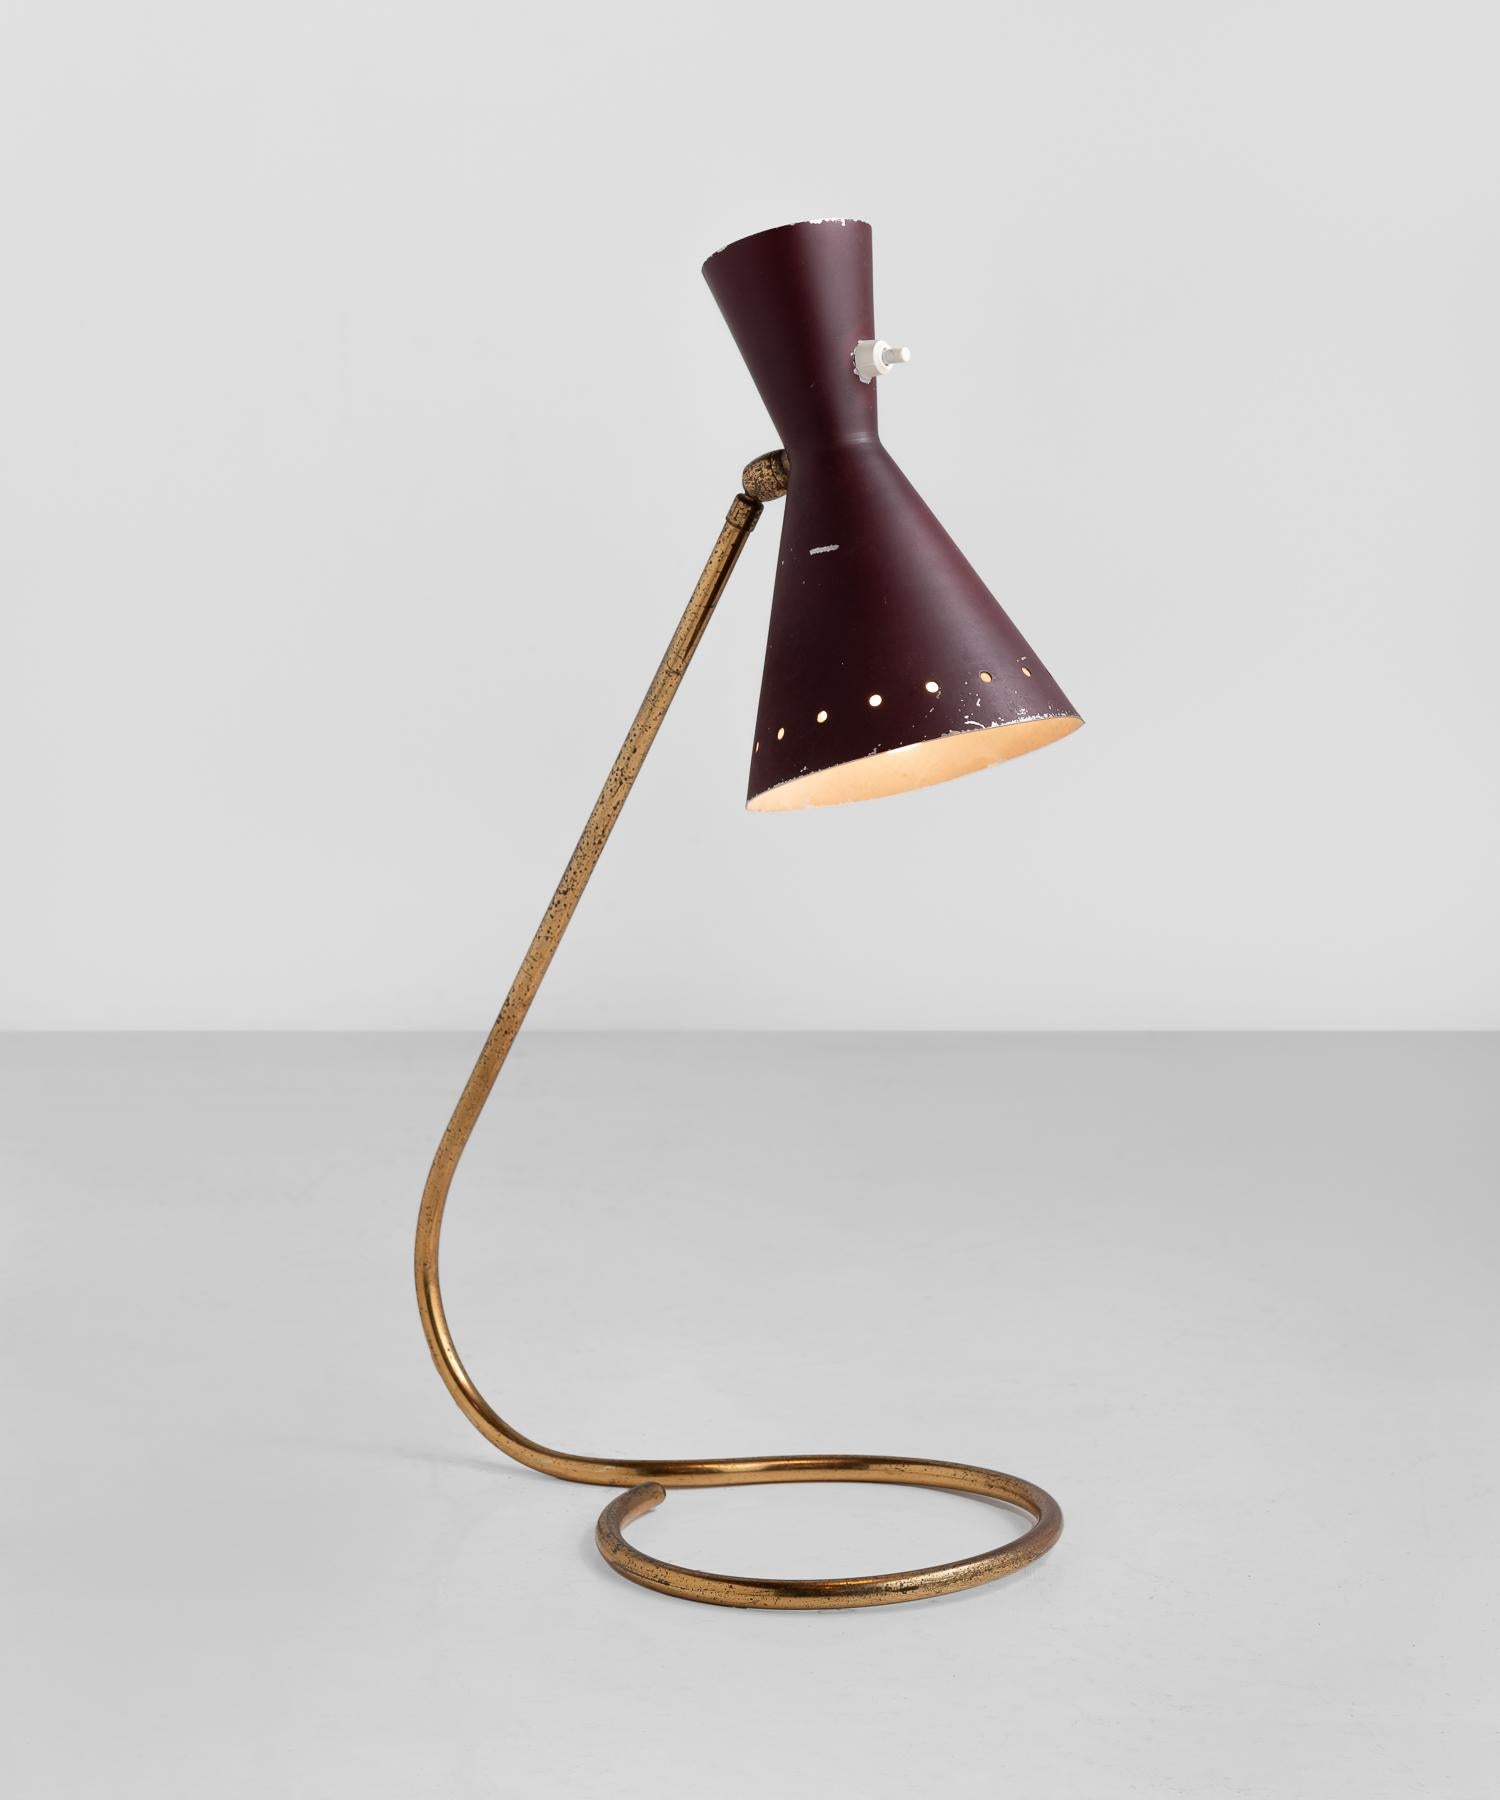 Brass and Burgundy Table Lamp, circa 1950

Painted metal shade sits atop an elegant minimal Stand, which curves into a base.